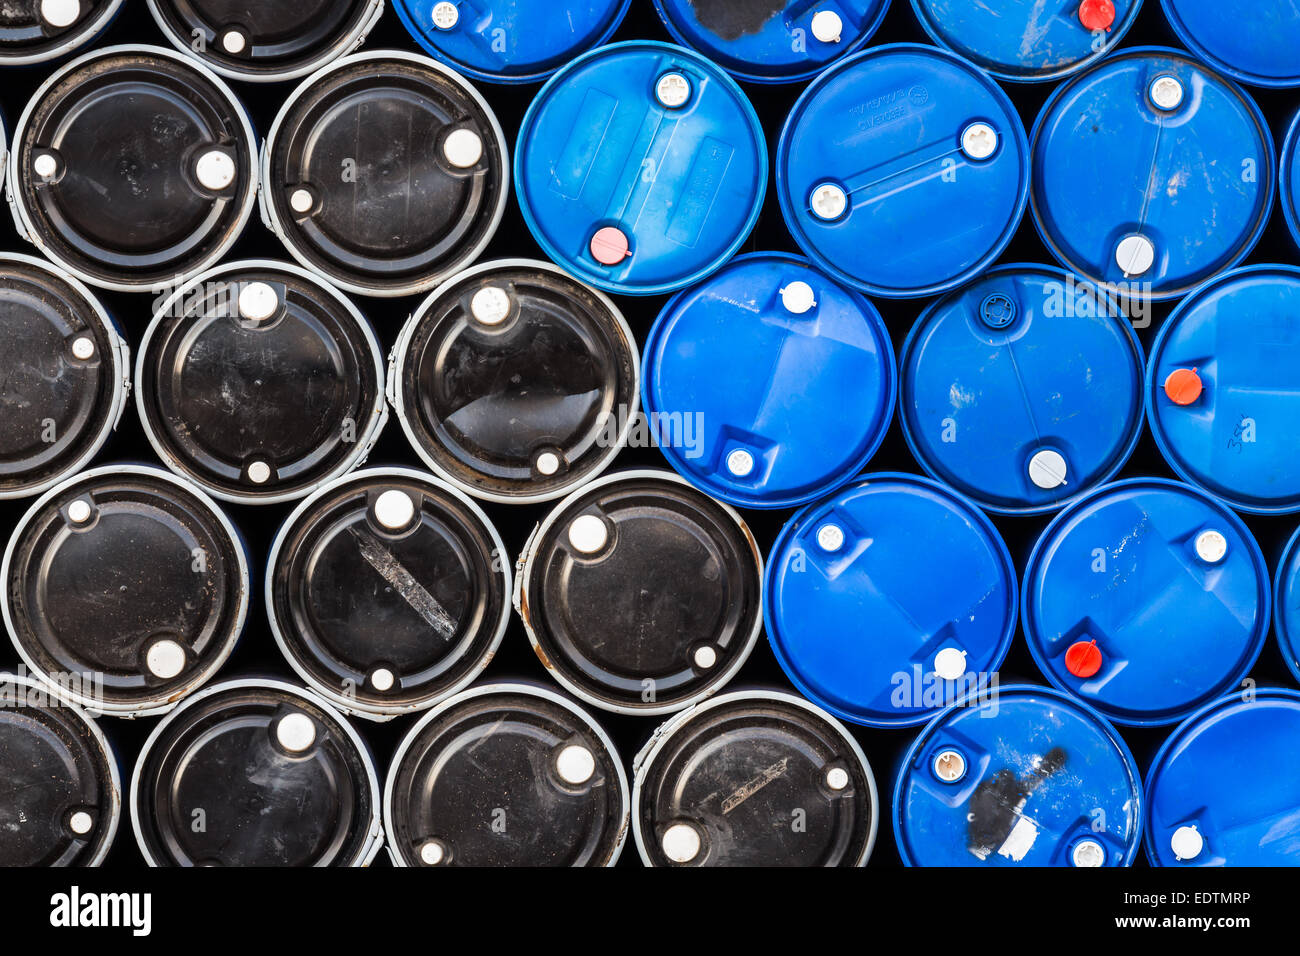 Blue and black oil barrels background Stock Photo